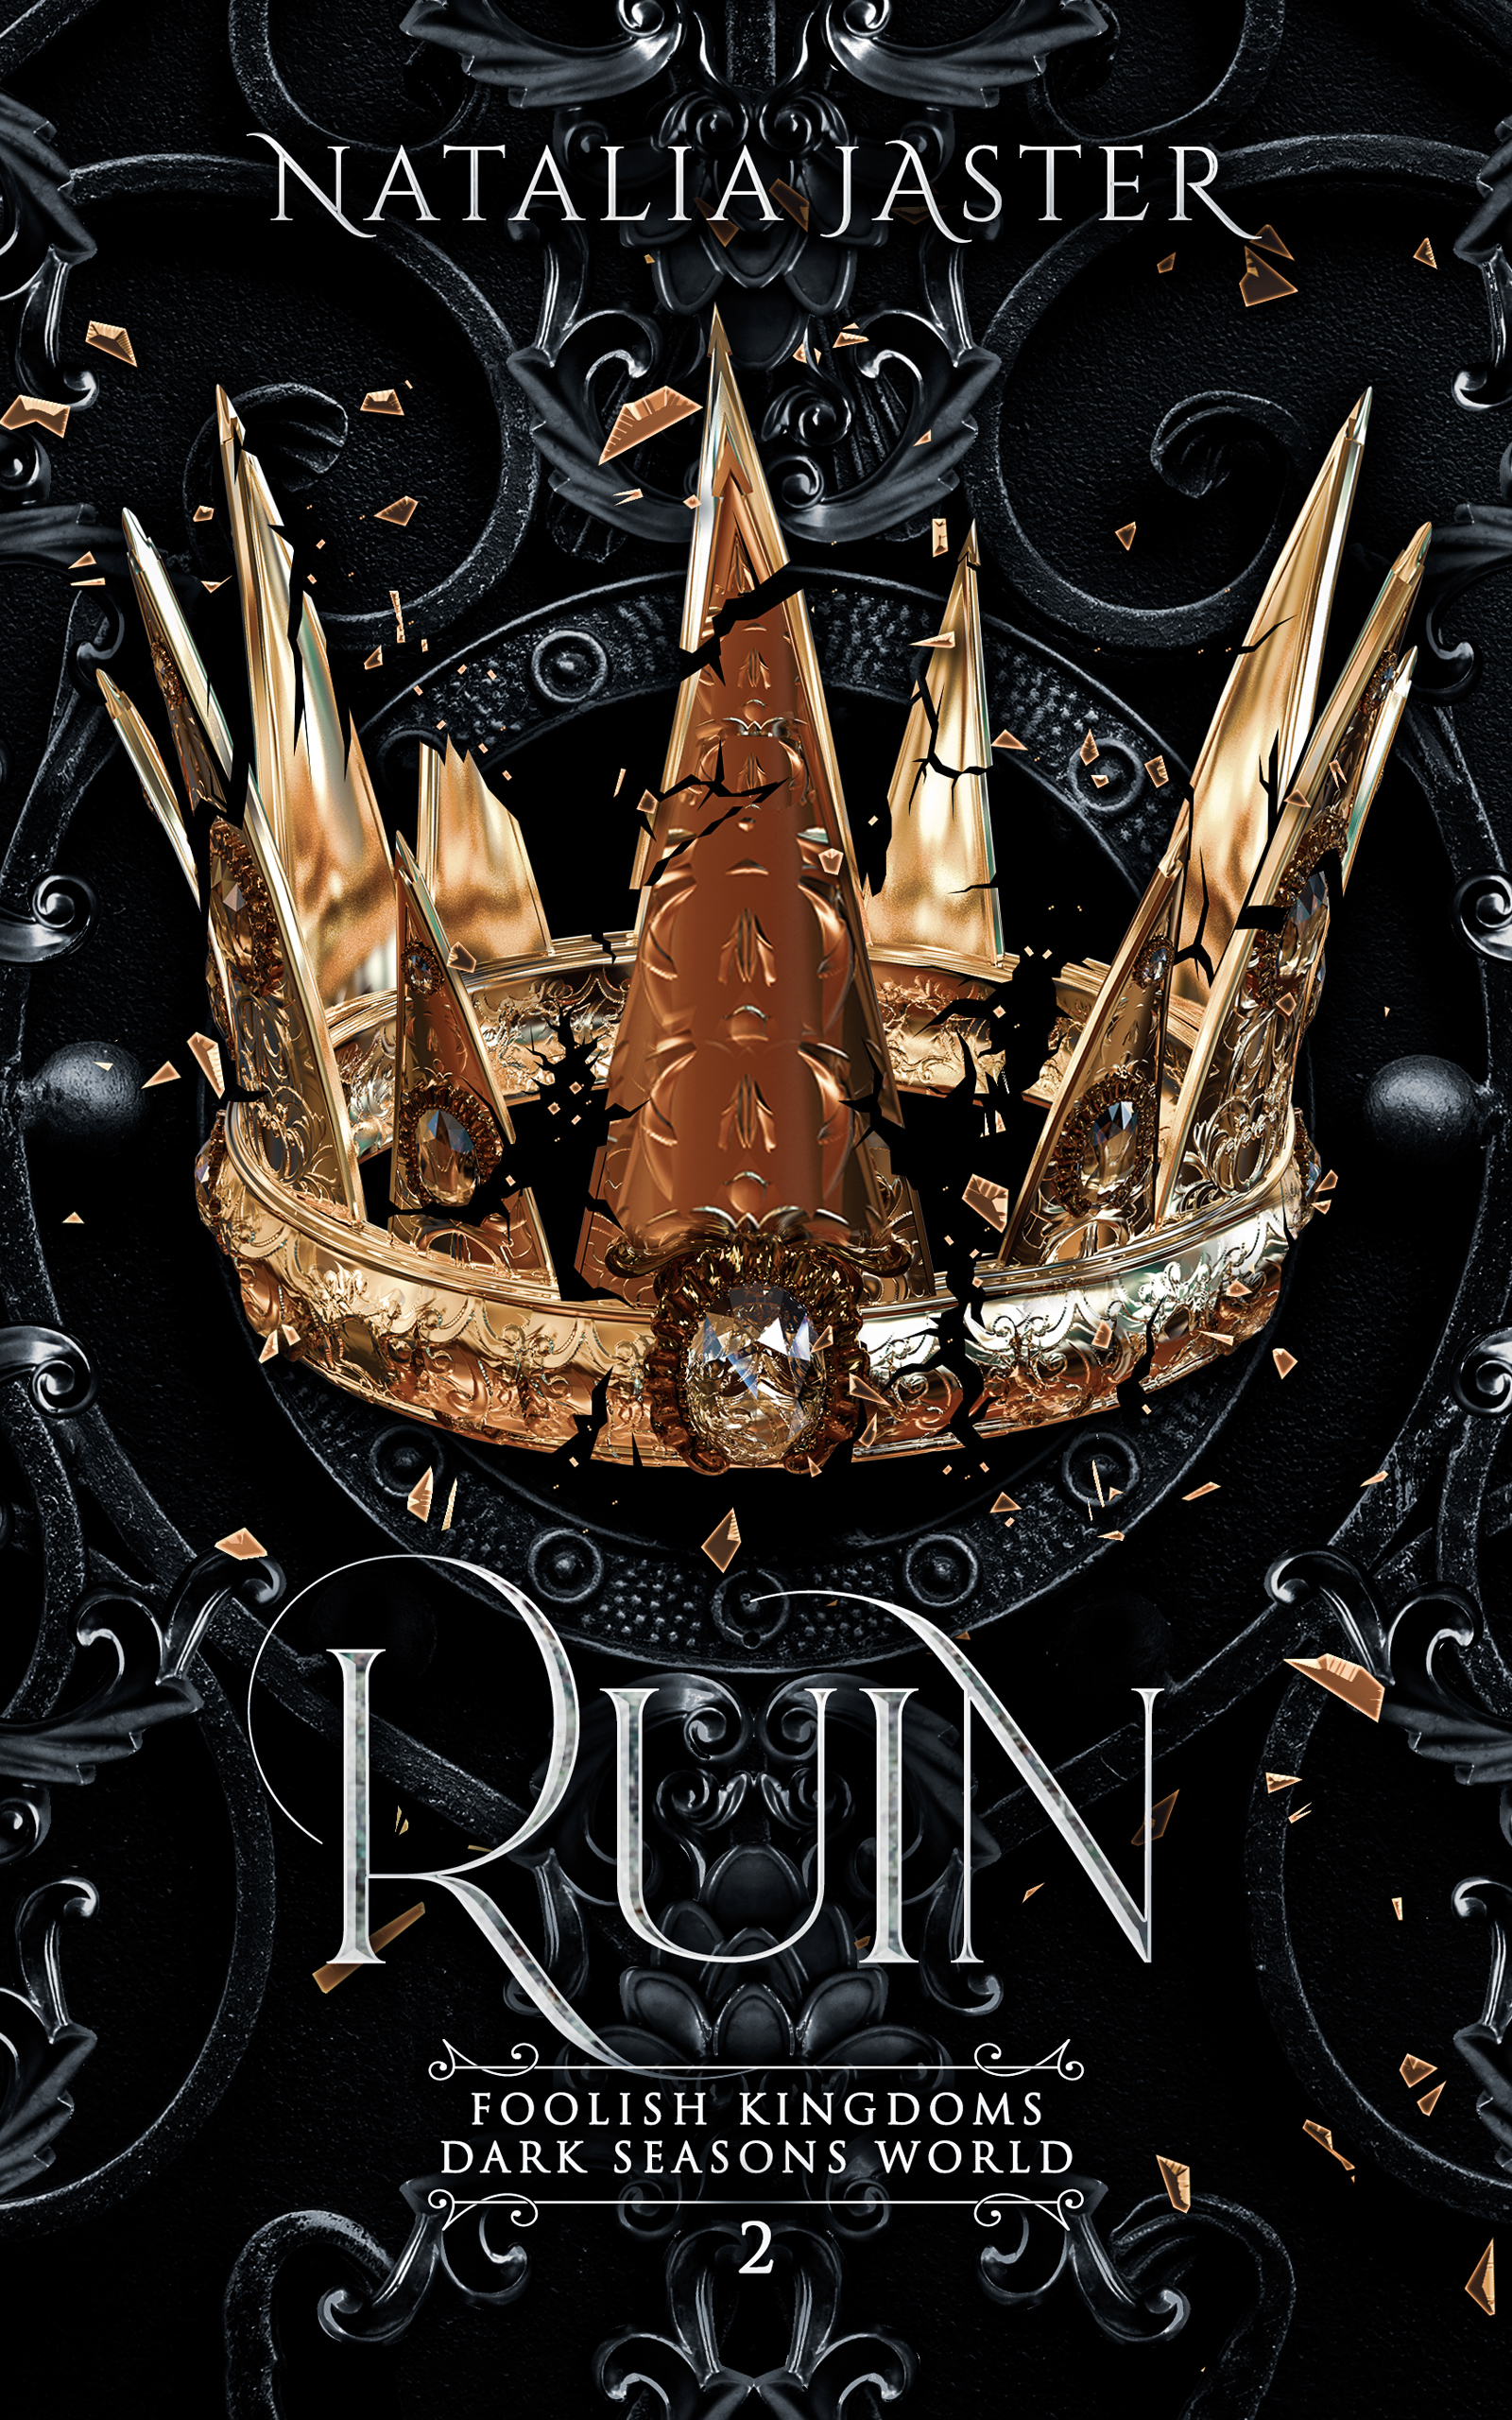 Cover for Ruin by Natalia Jaster in the Foolish Kingdom Series